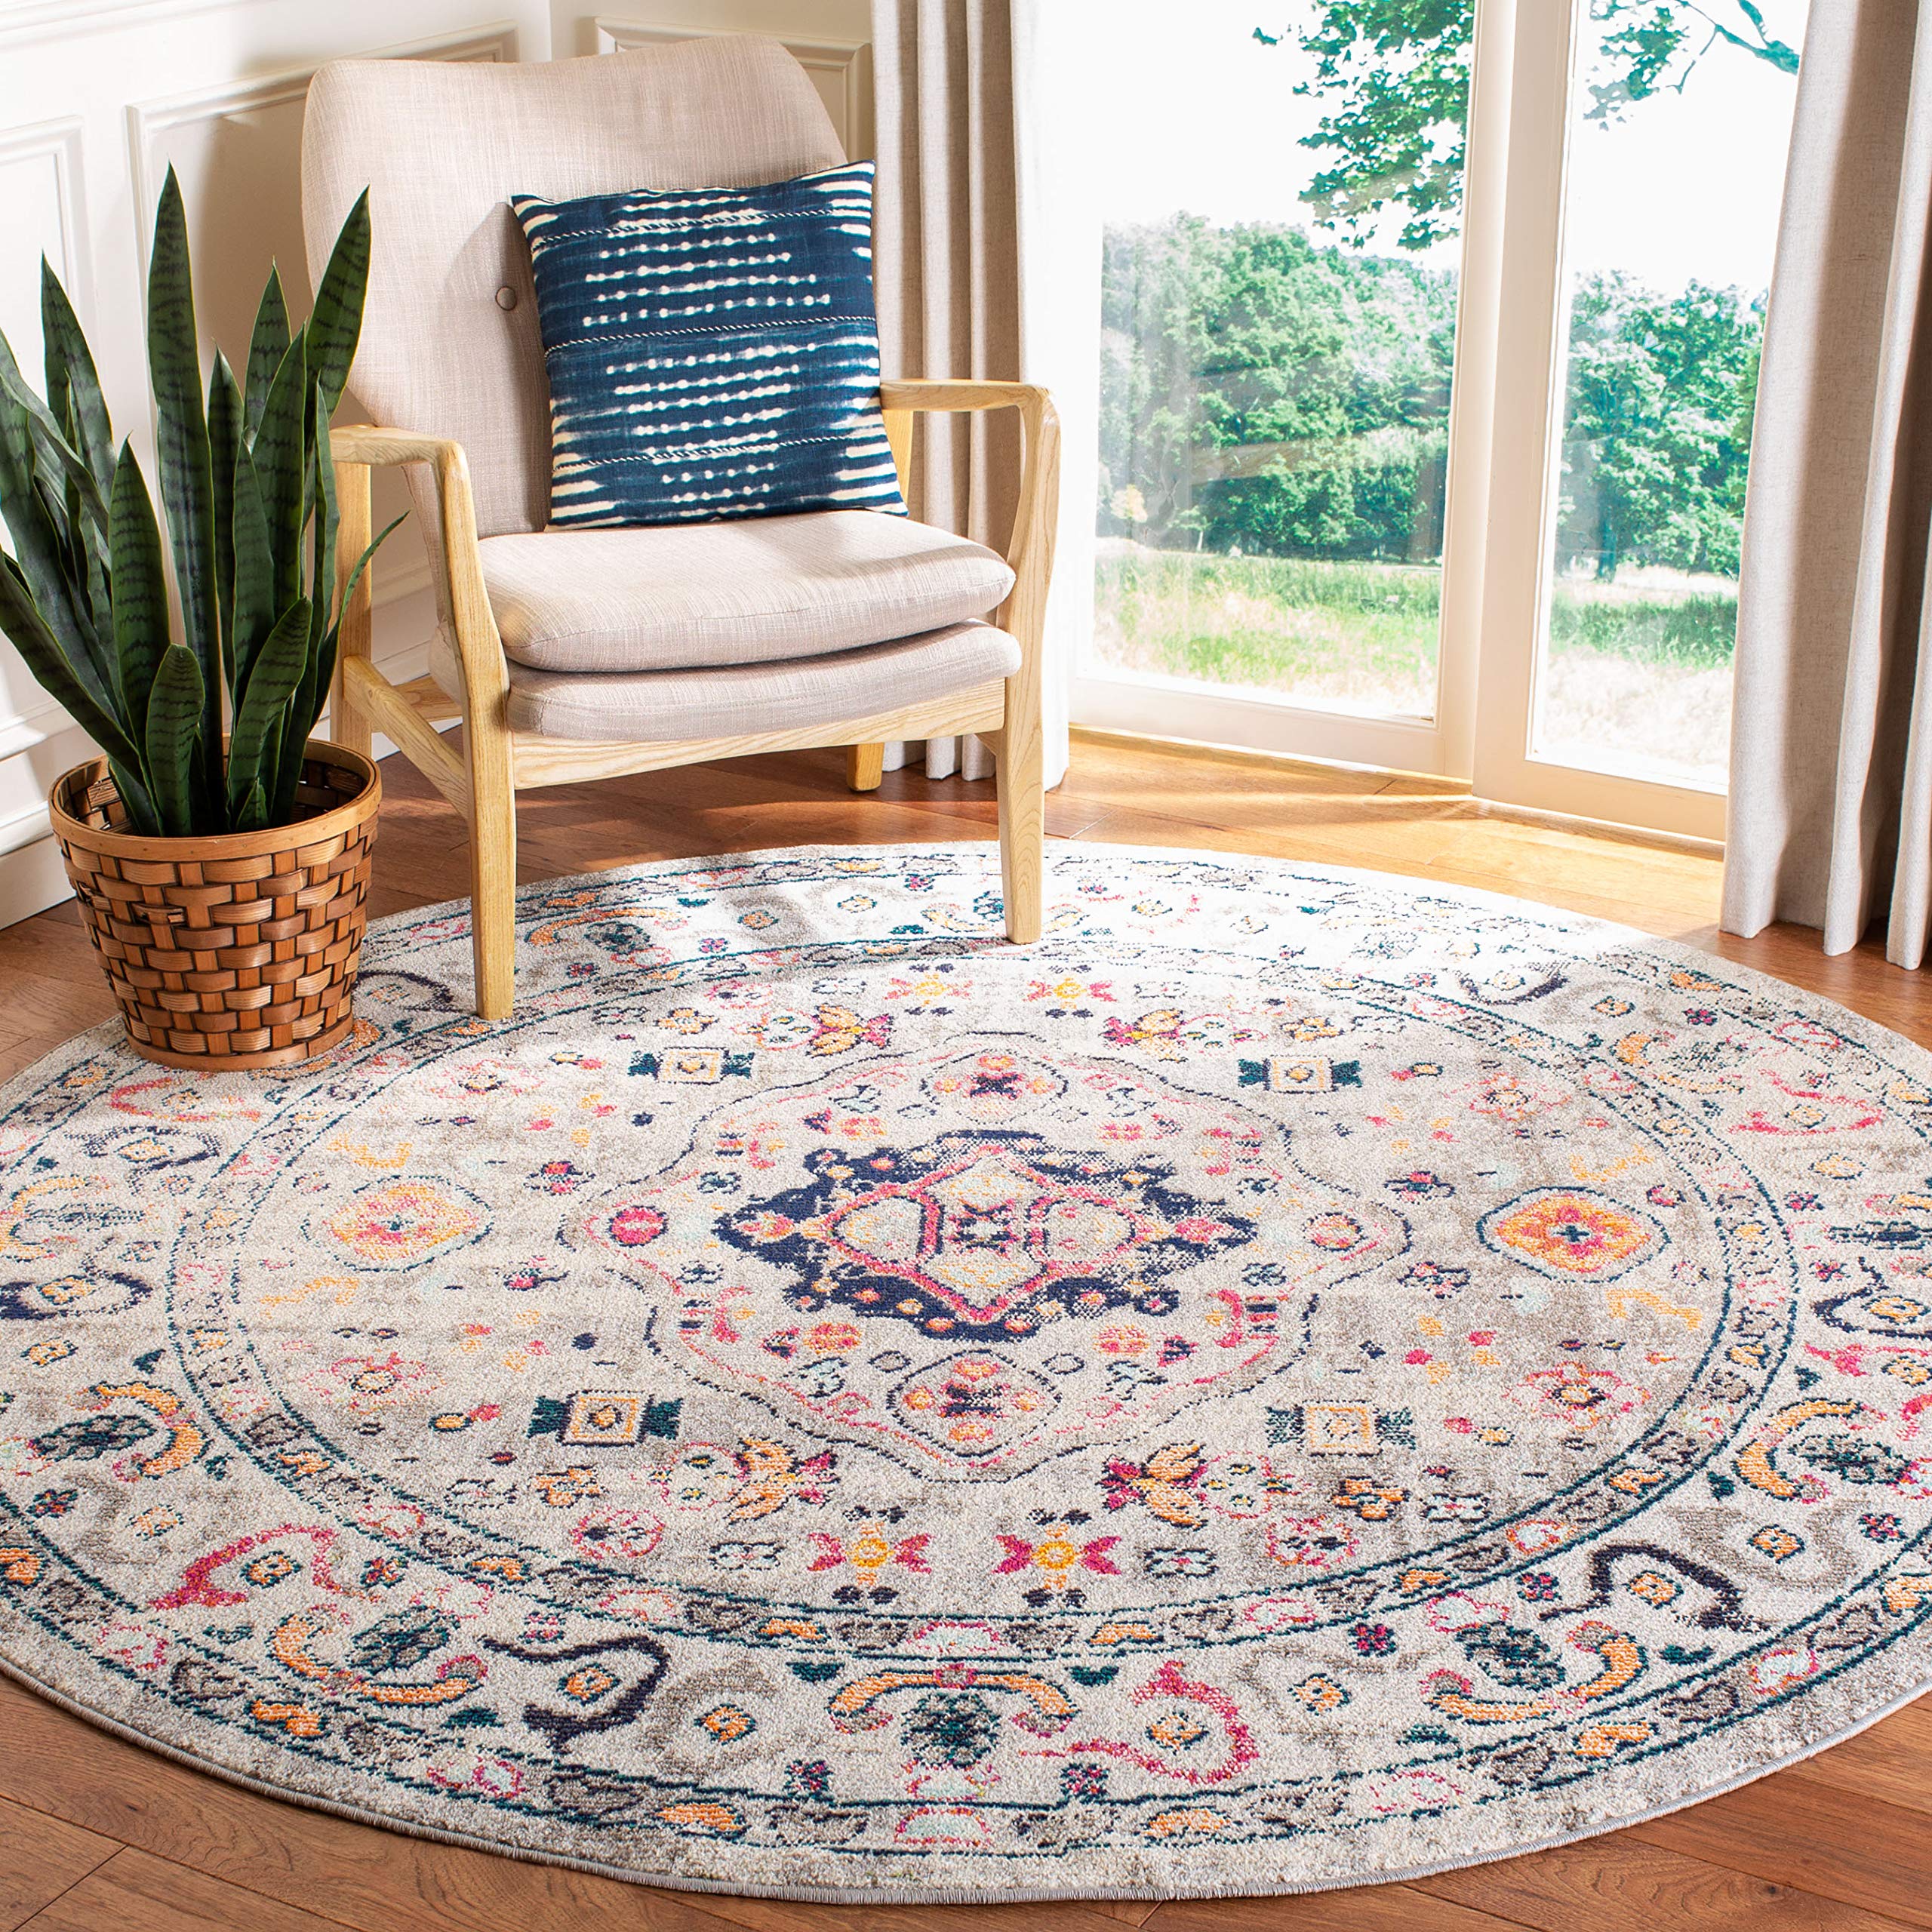 SAFAVIEH Madison Collection Area Rug - 6'7" Round, Grey & Blue, Boho Chic Medallion Distressed Design, Non-Shedding & Easy Care, Ideal for High Traffic Areas in Living Room, Bedroom (MAD468F)